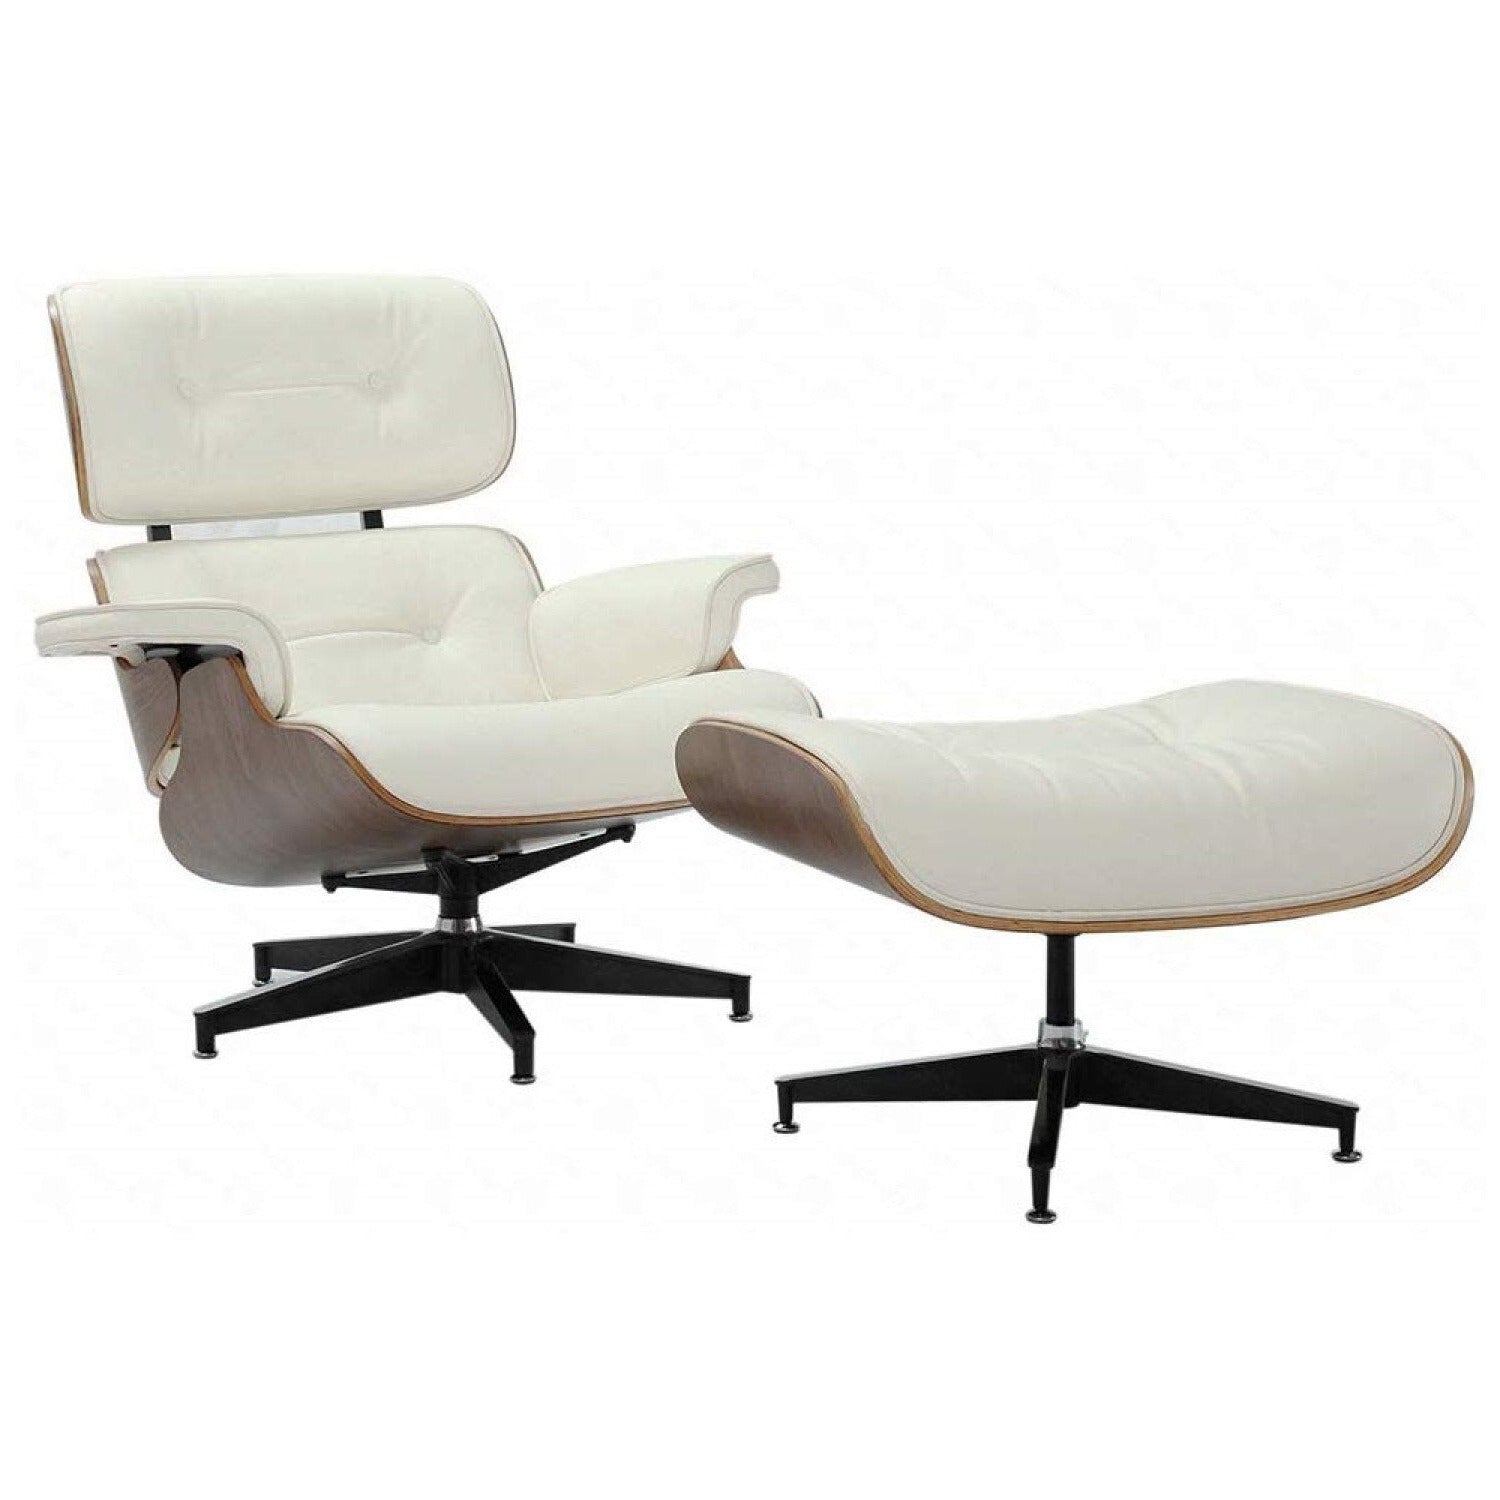 Homio Decor Living Room White Walnut Wood Classic Leather Lounge Chair with Ottoman